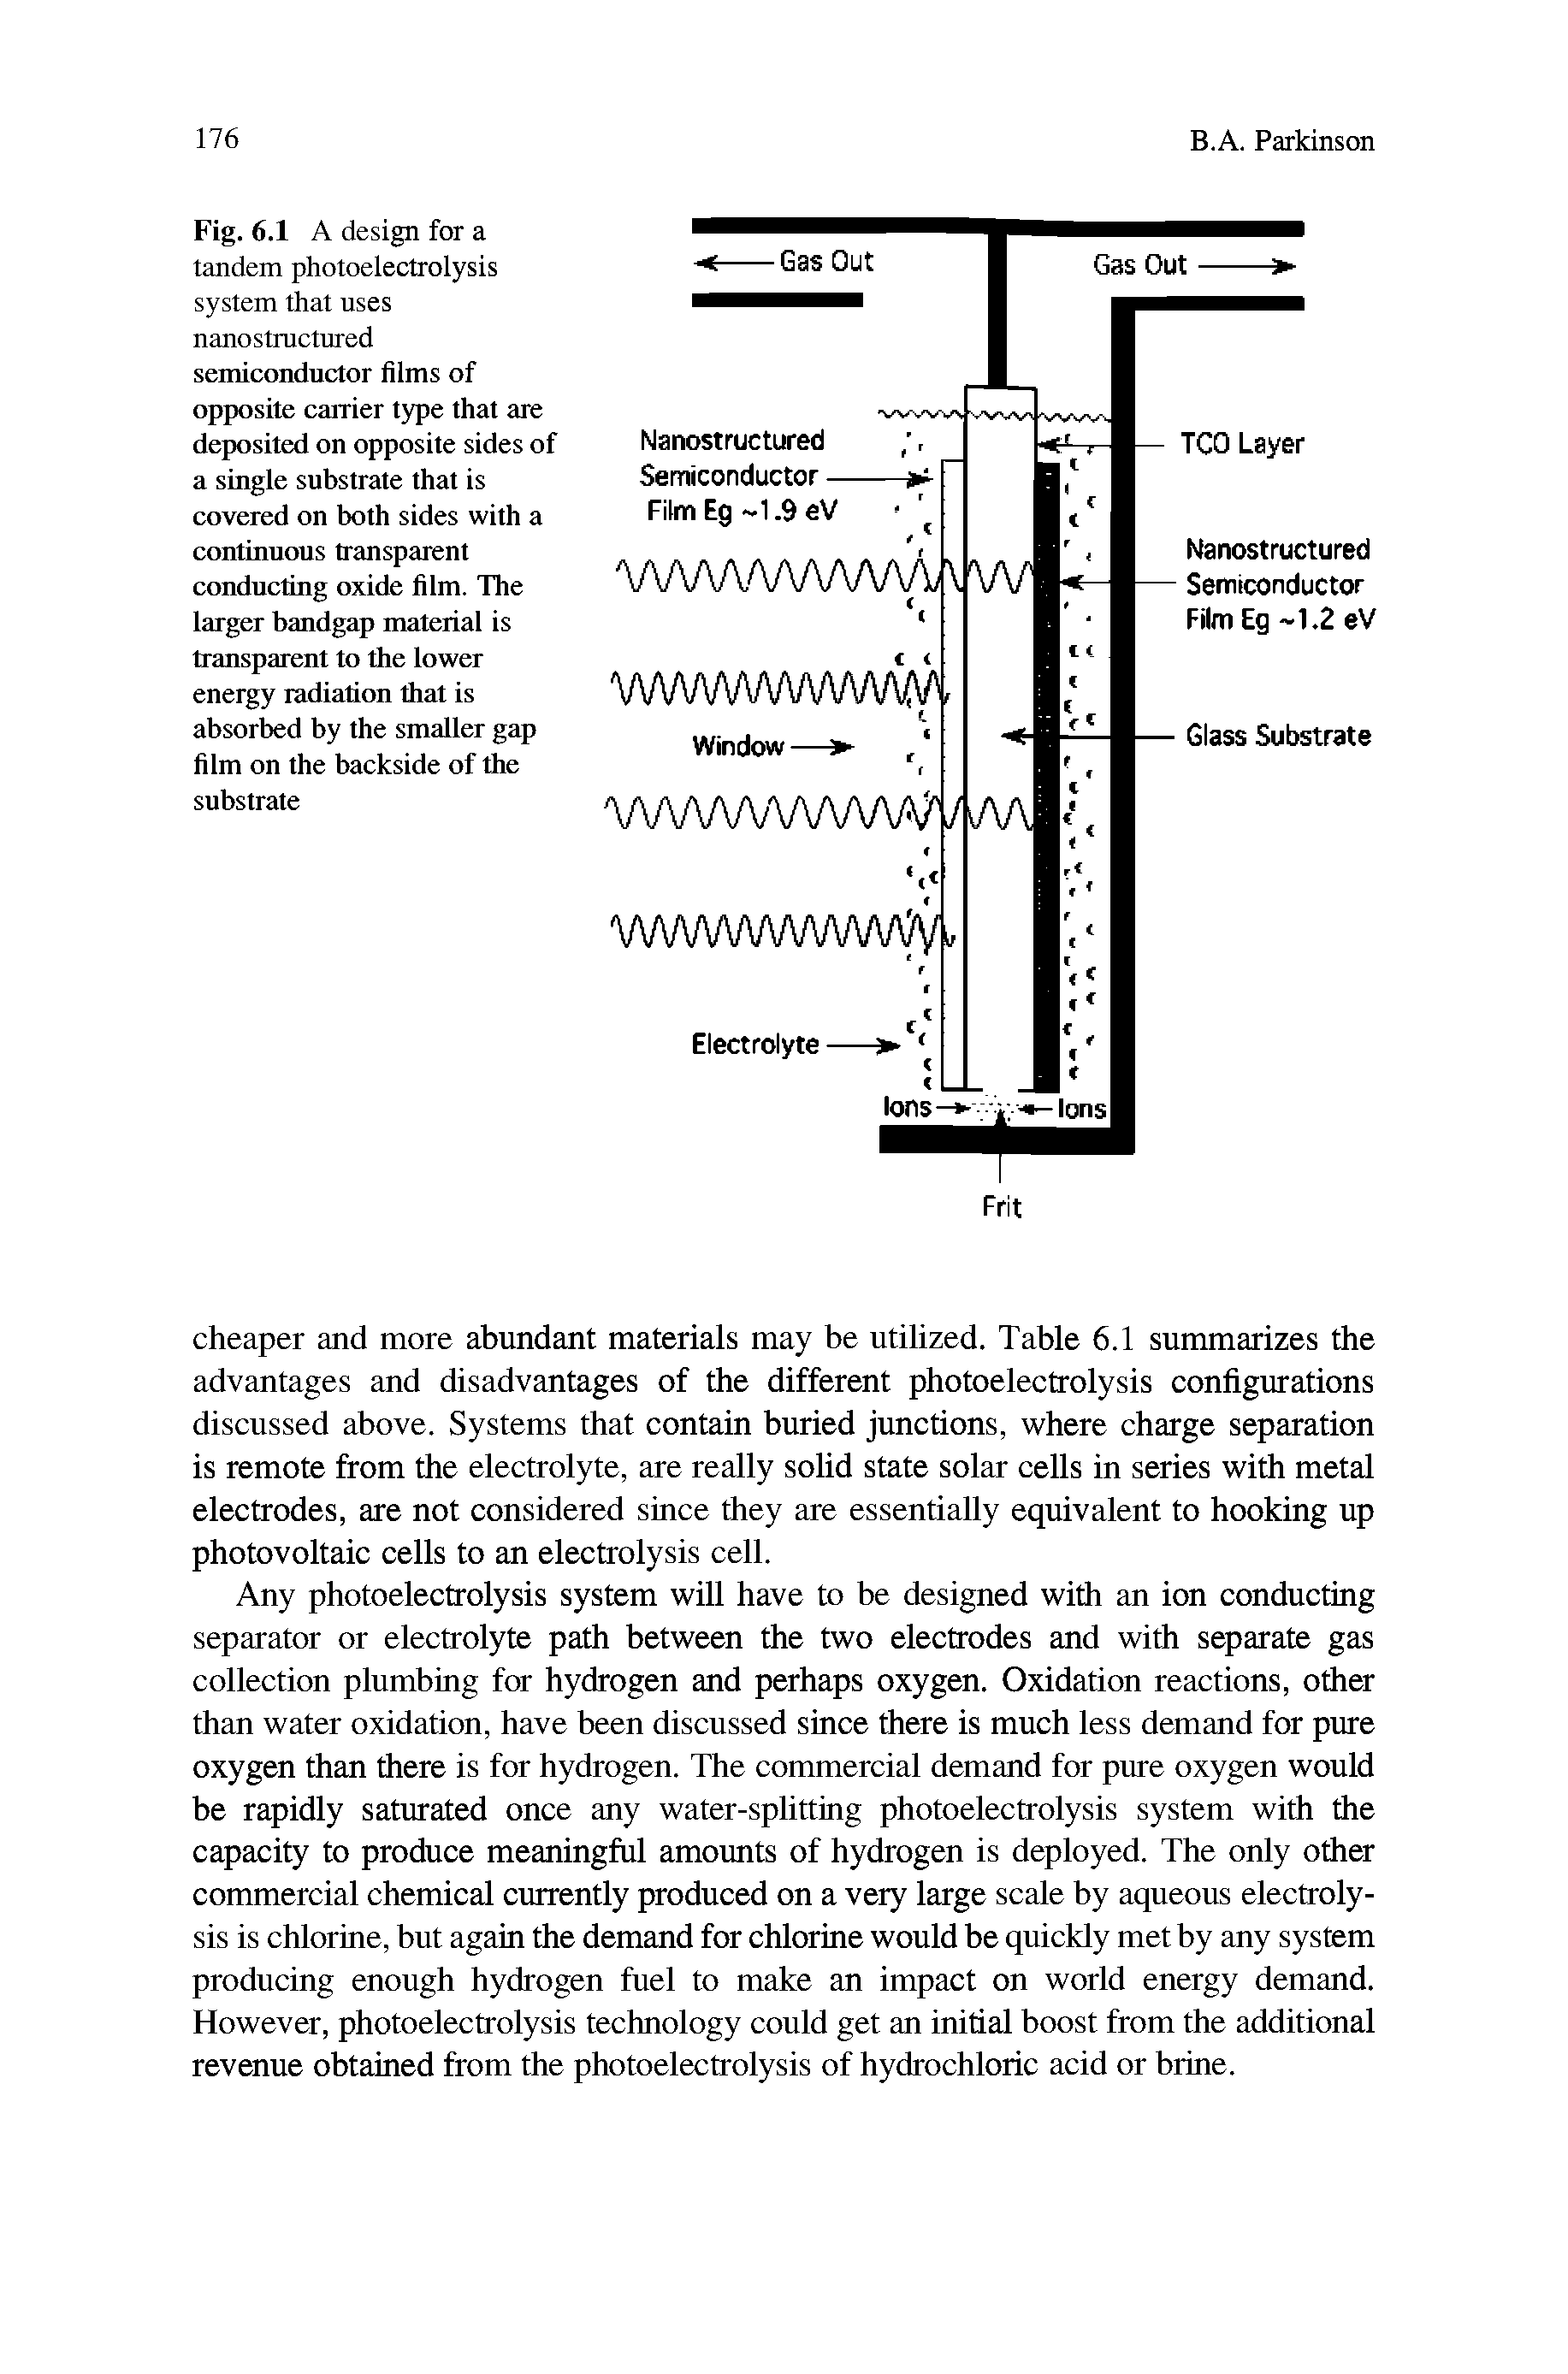 Fig. 6.1 A design for a tandem photoelectrolysis system that uses nanostmctured semiconductor films of opposite cairier type that are deposited on opposite sides of a single substrate that is covered on both sides with a continuous transparent conducting oxide film. The larger bandgap material is transparent to the lower energy radiation that is absorbed by the smaller gap film on the backside of the substrate...